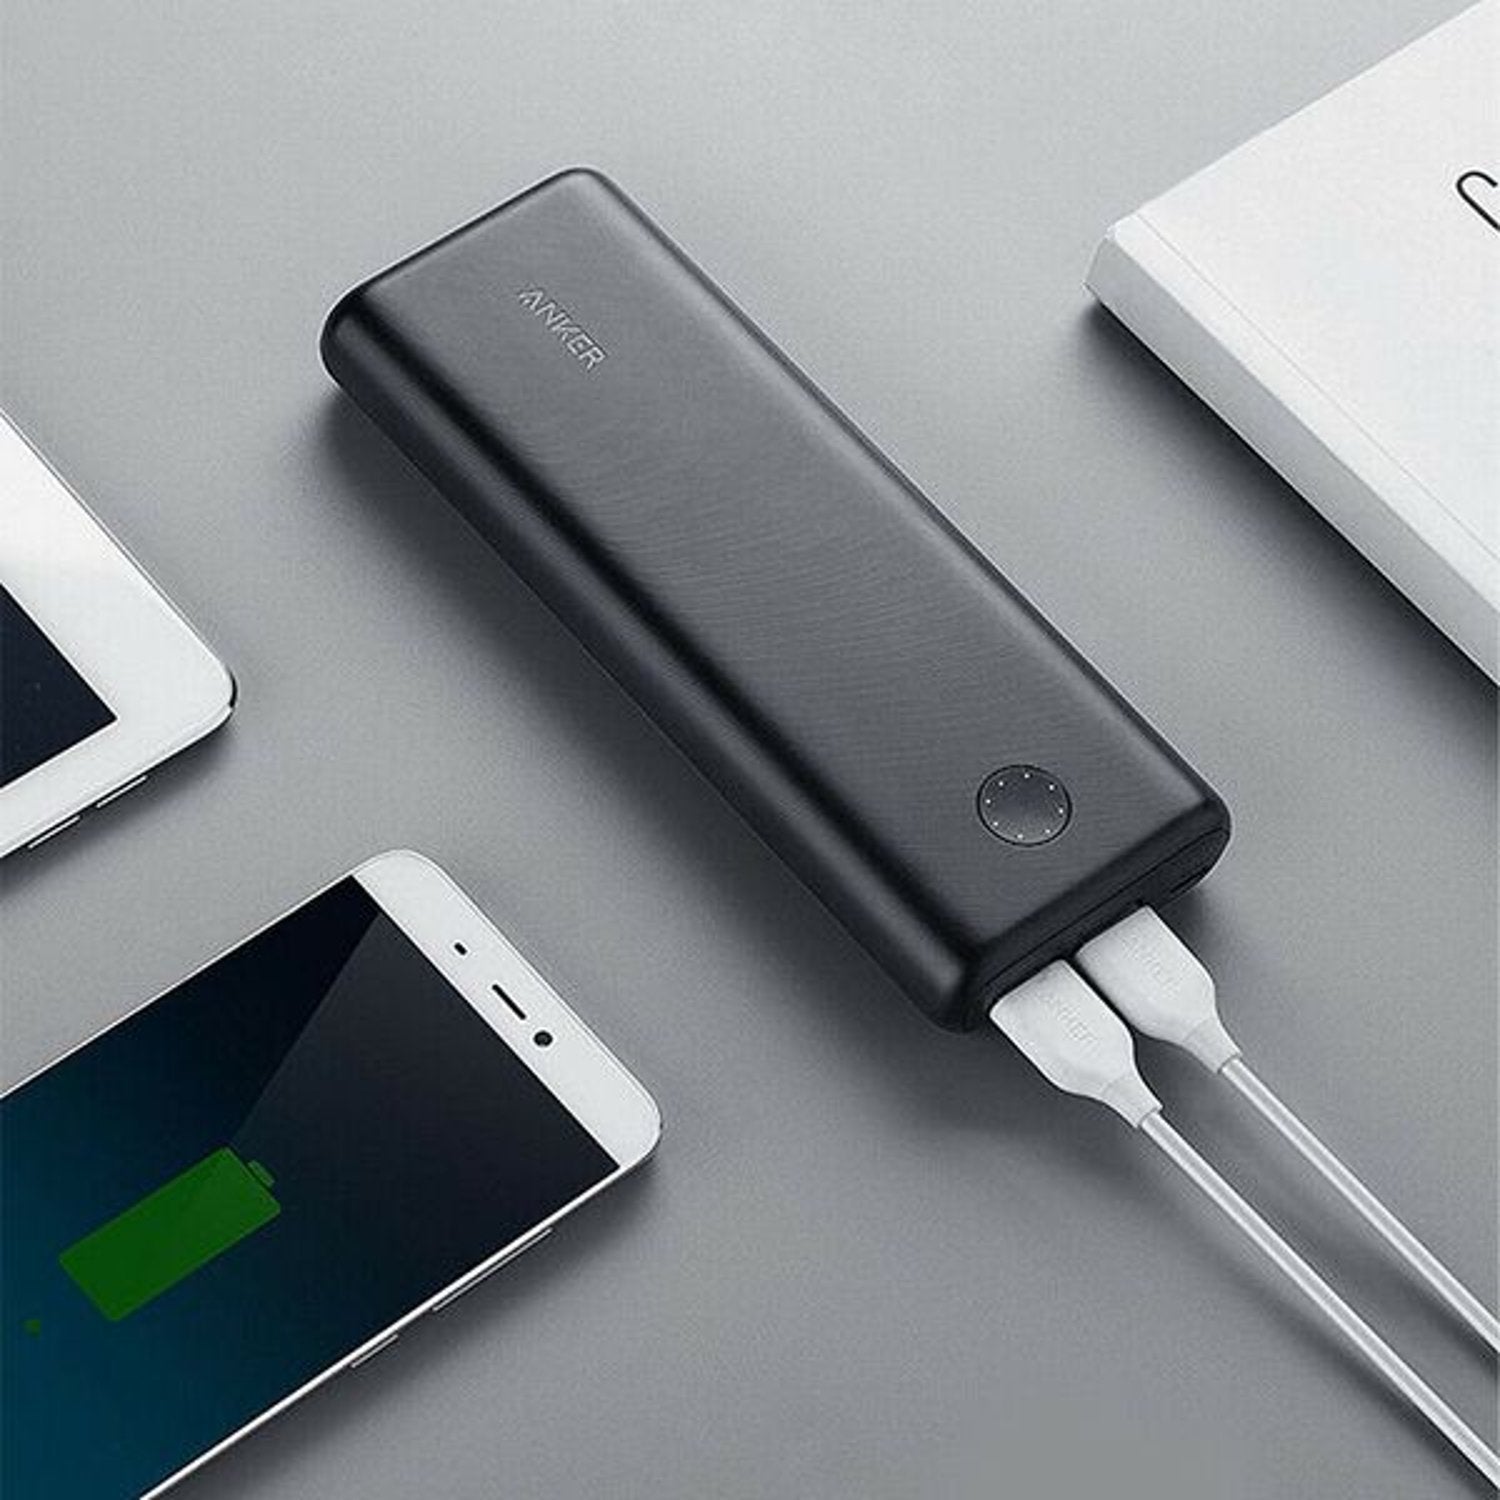 Anker PowerCore Select 20000 mAh Power Bank with 2 USB-A Ports, Light Weight Portable Charger - Black